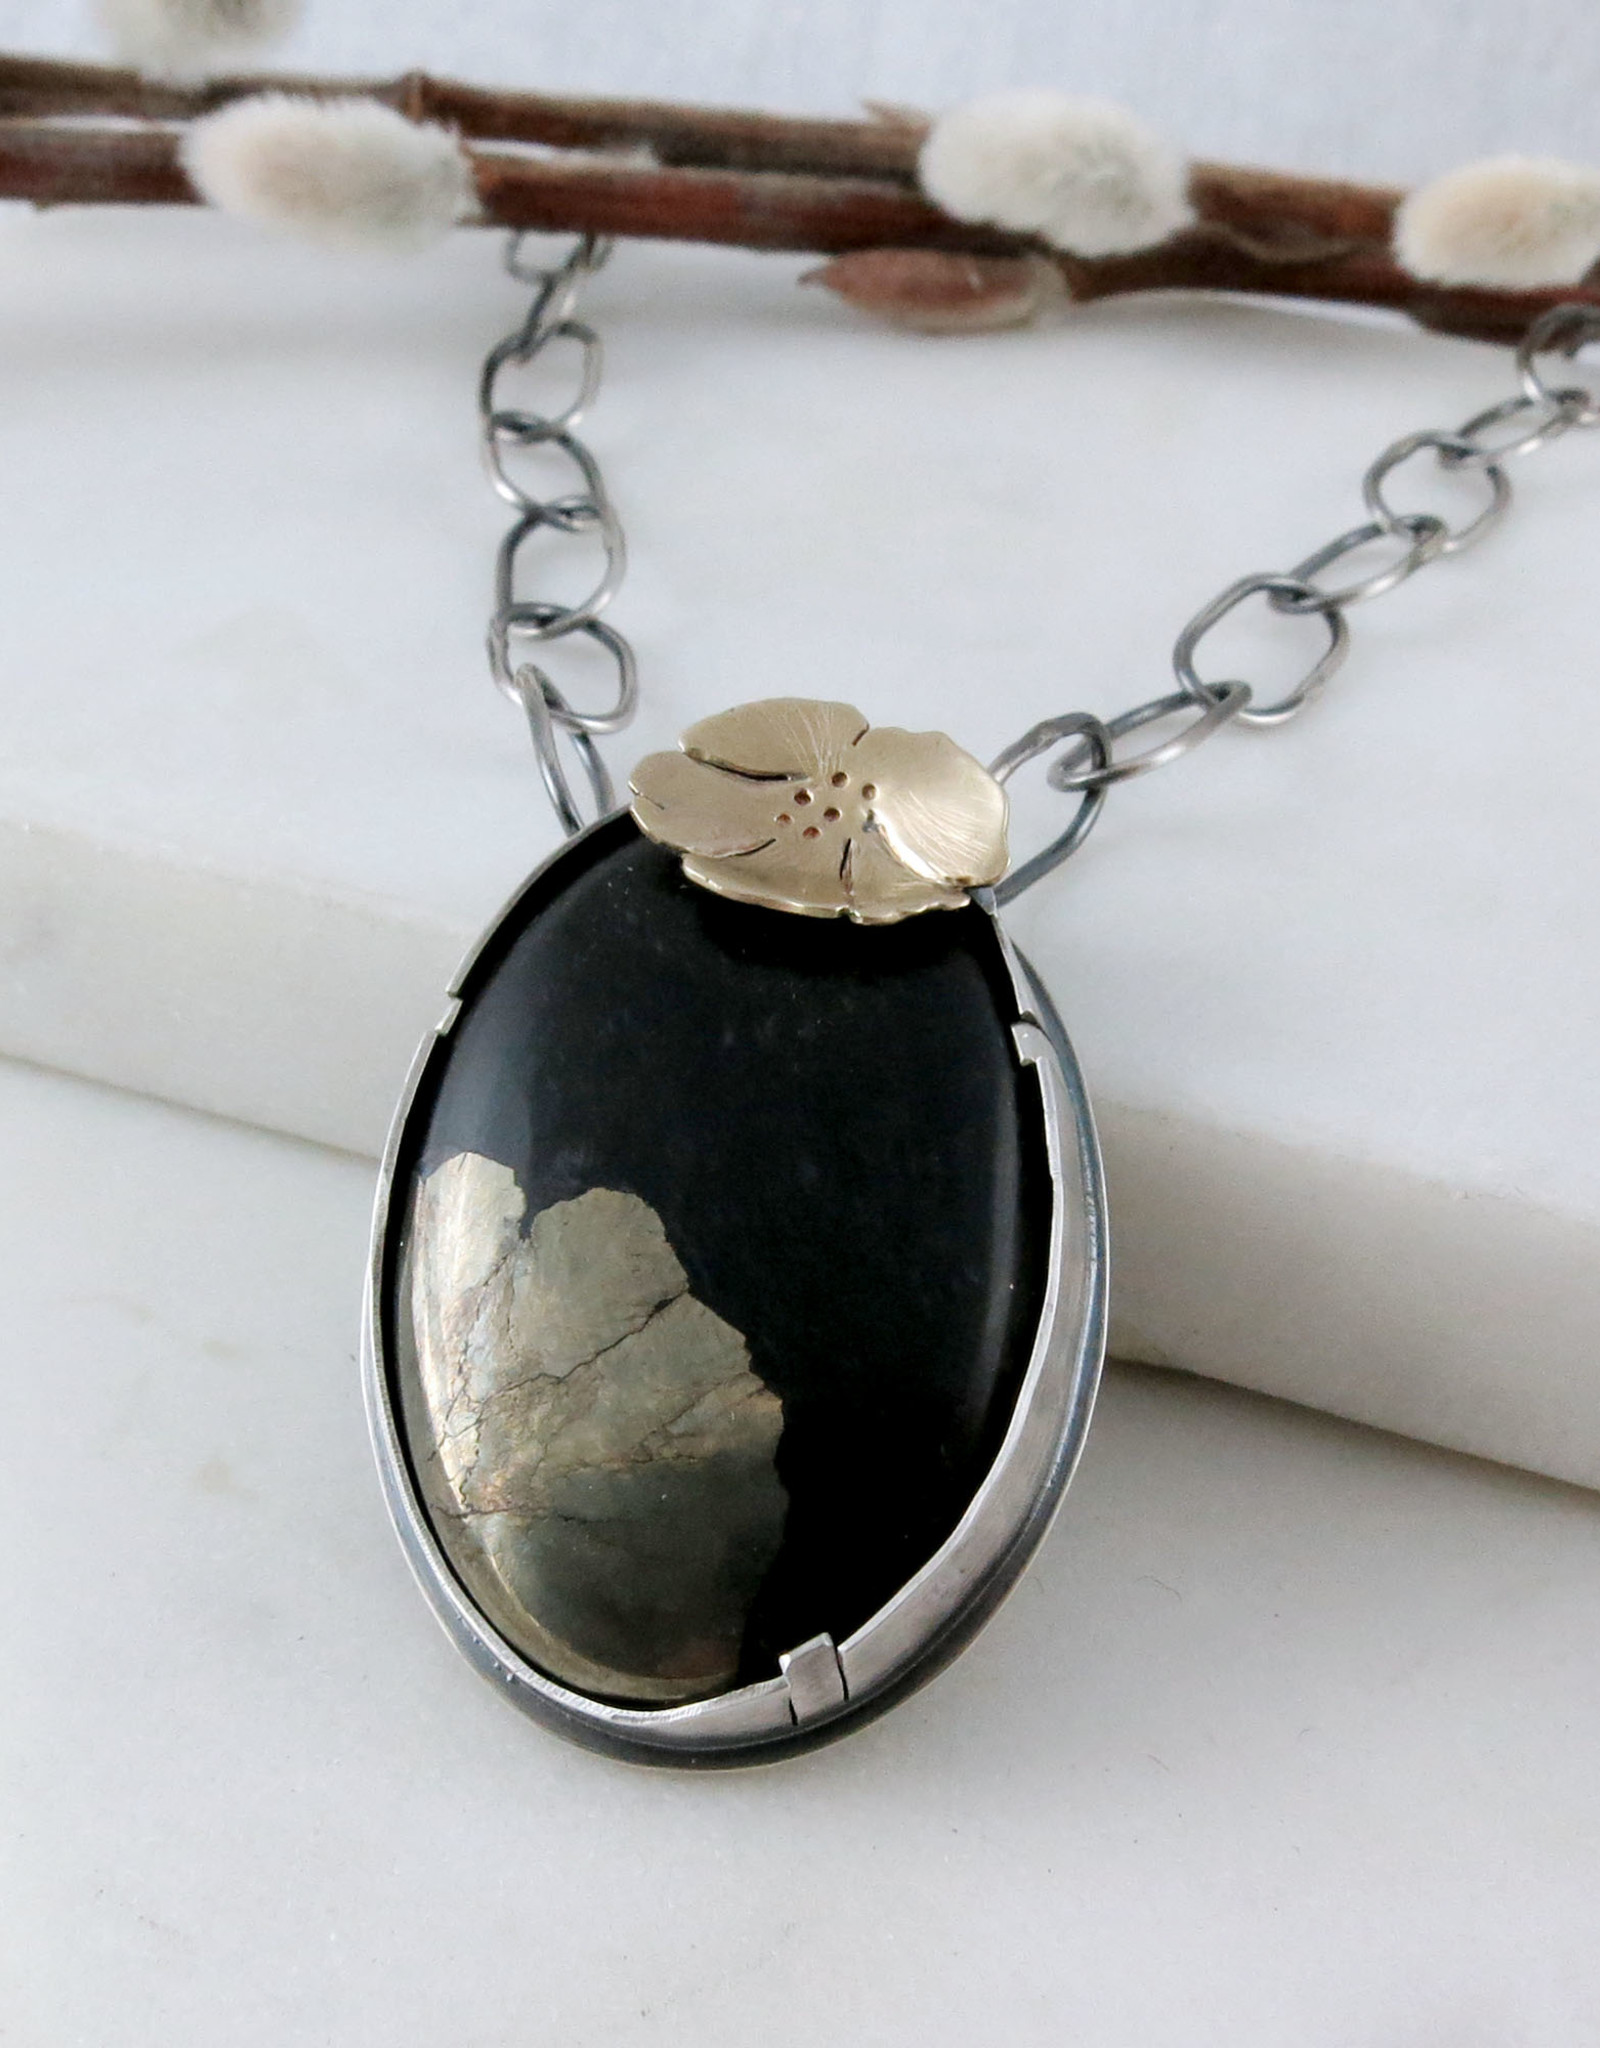 Catherine Chandler Moonflower Necklace with Chalcopyrite, Sterling Silver, and Gold 24" Long - CCJ